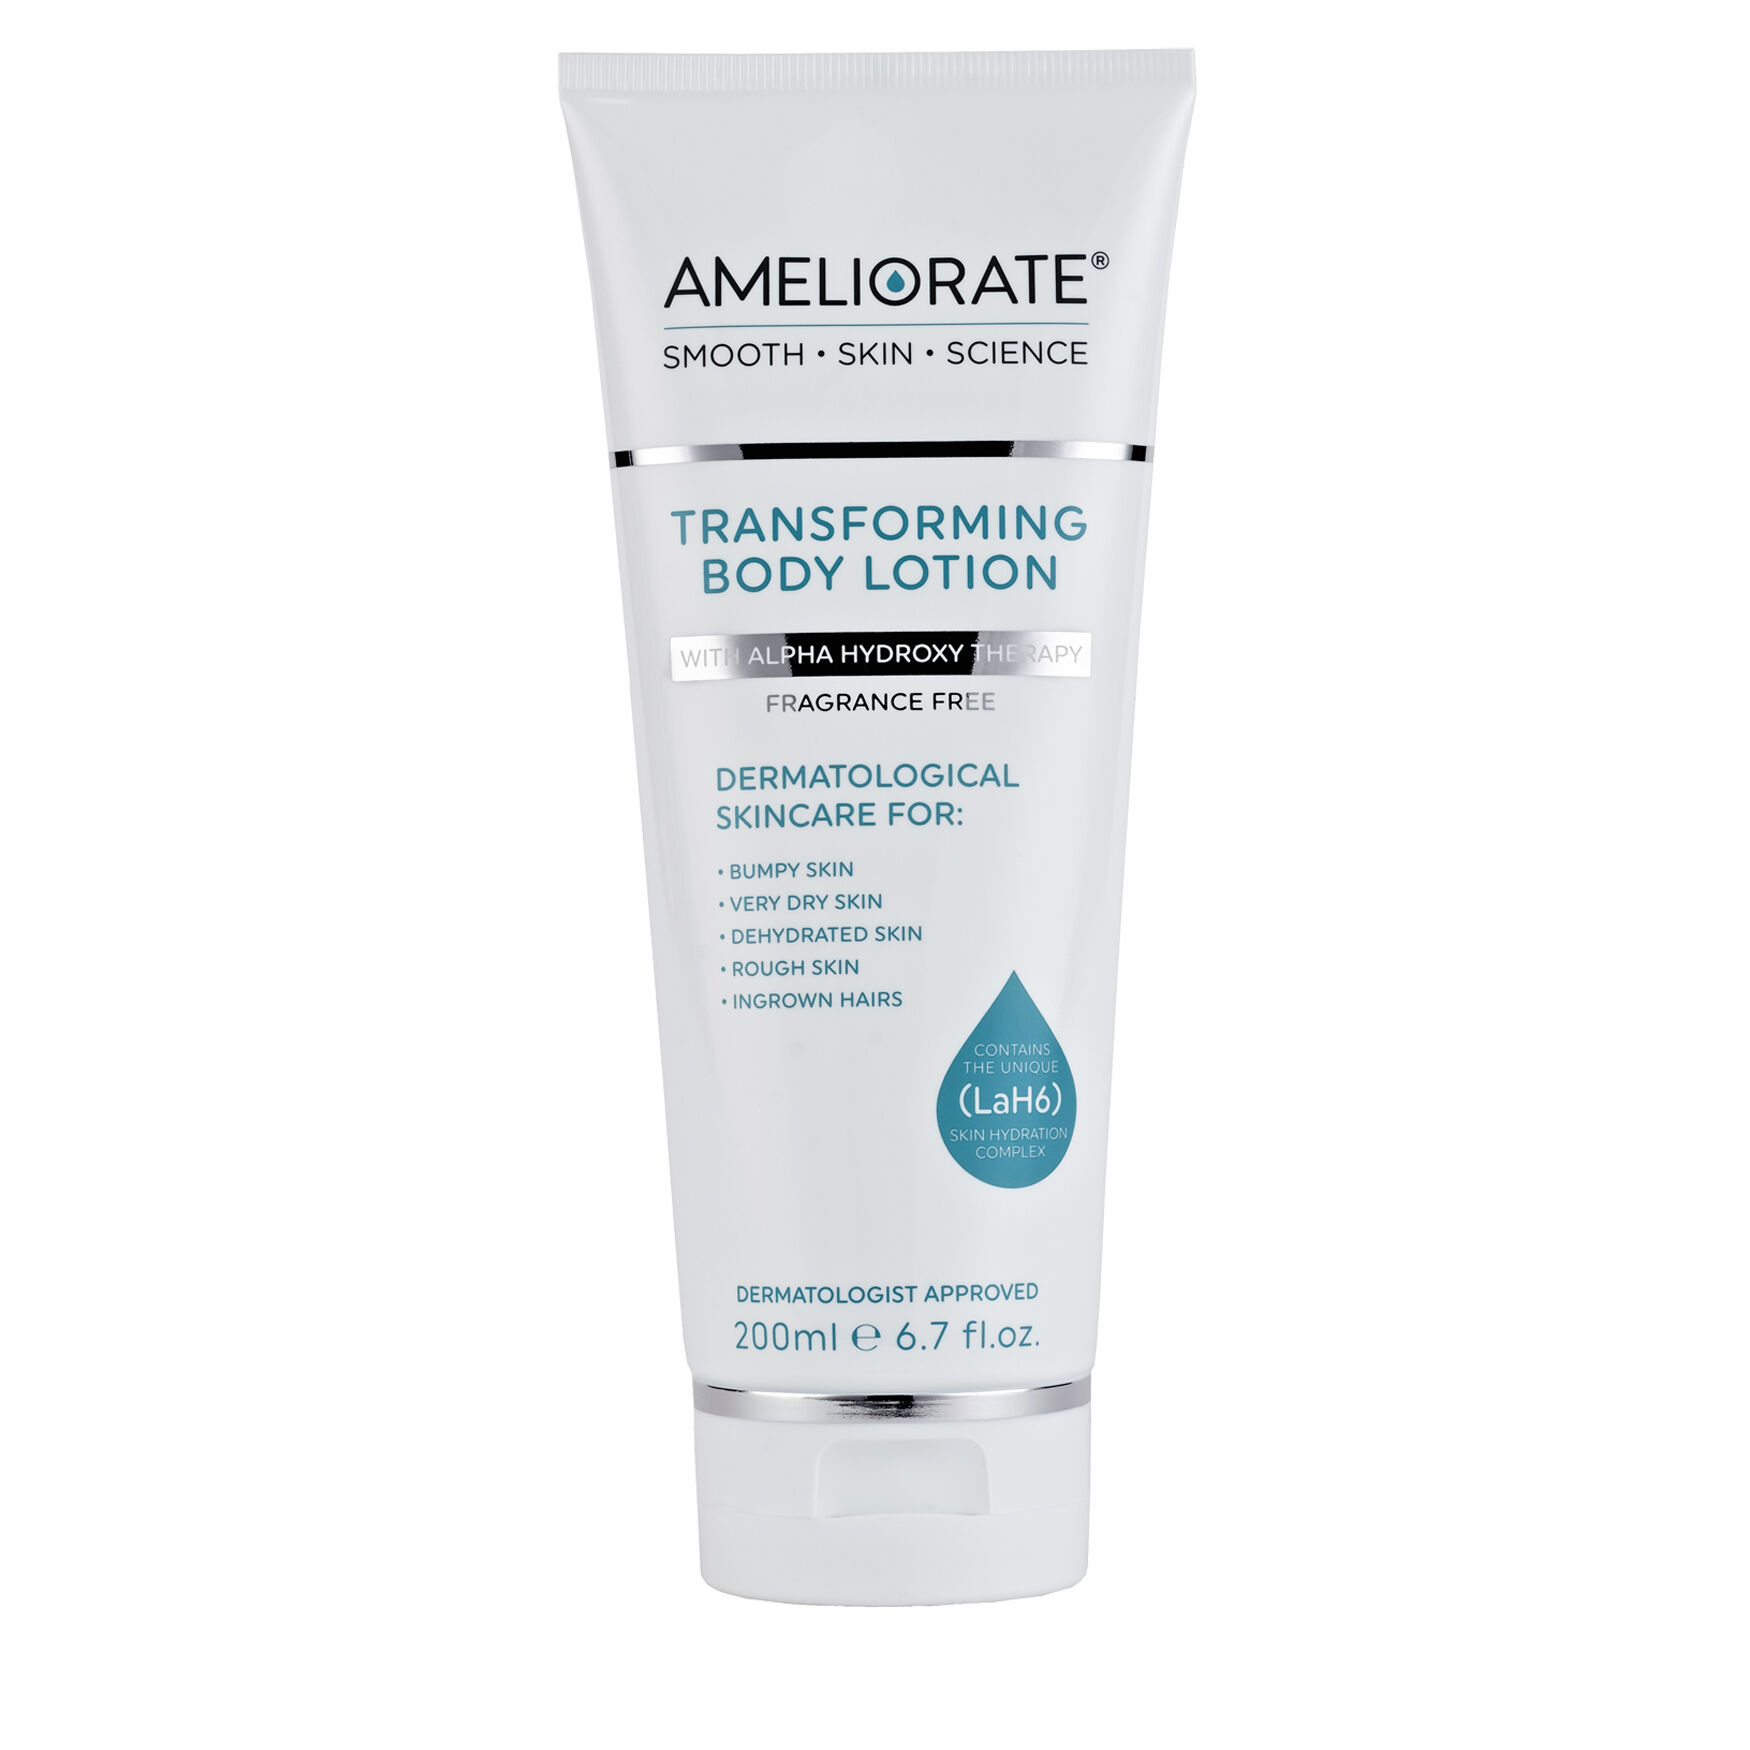 AMELIORATE FRAGRANCE FREE TRANSFORMING BODY LOTION